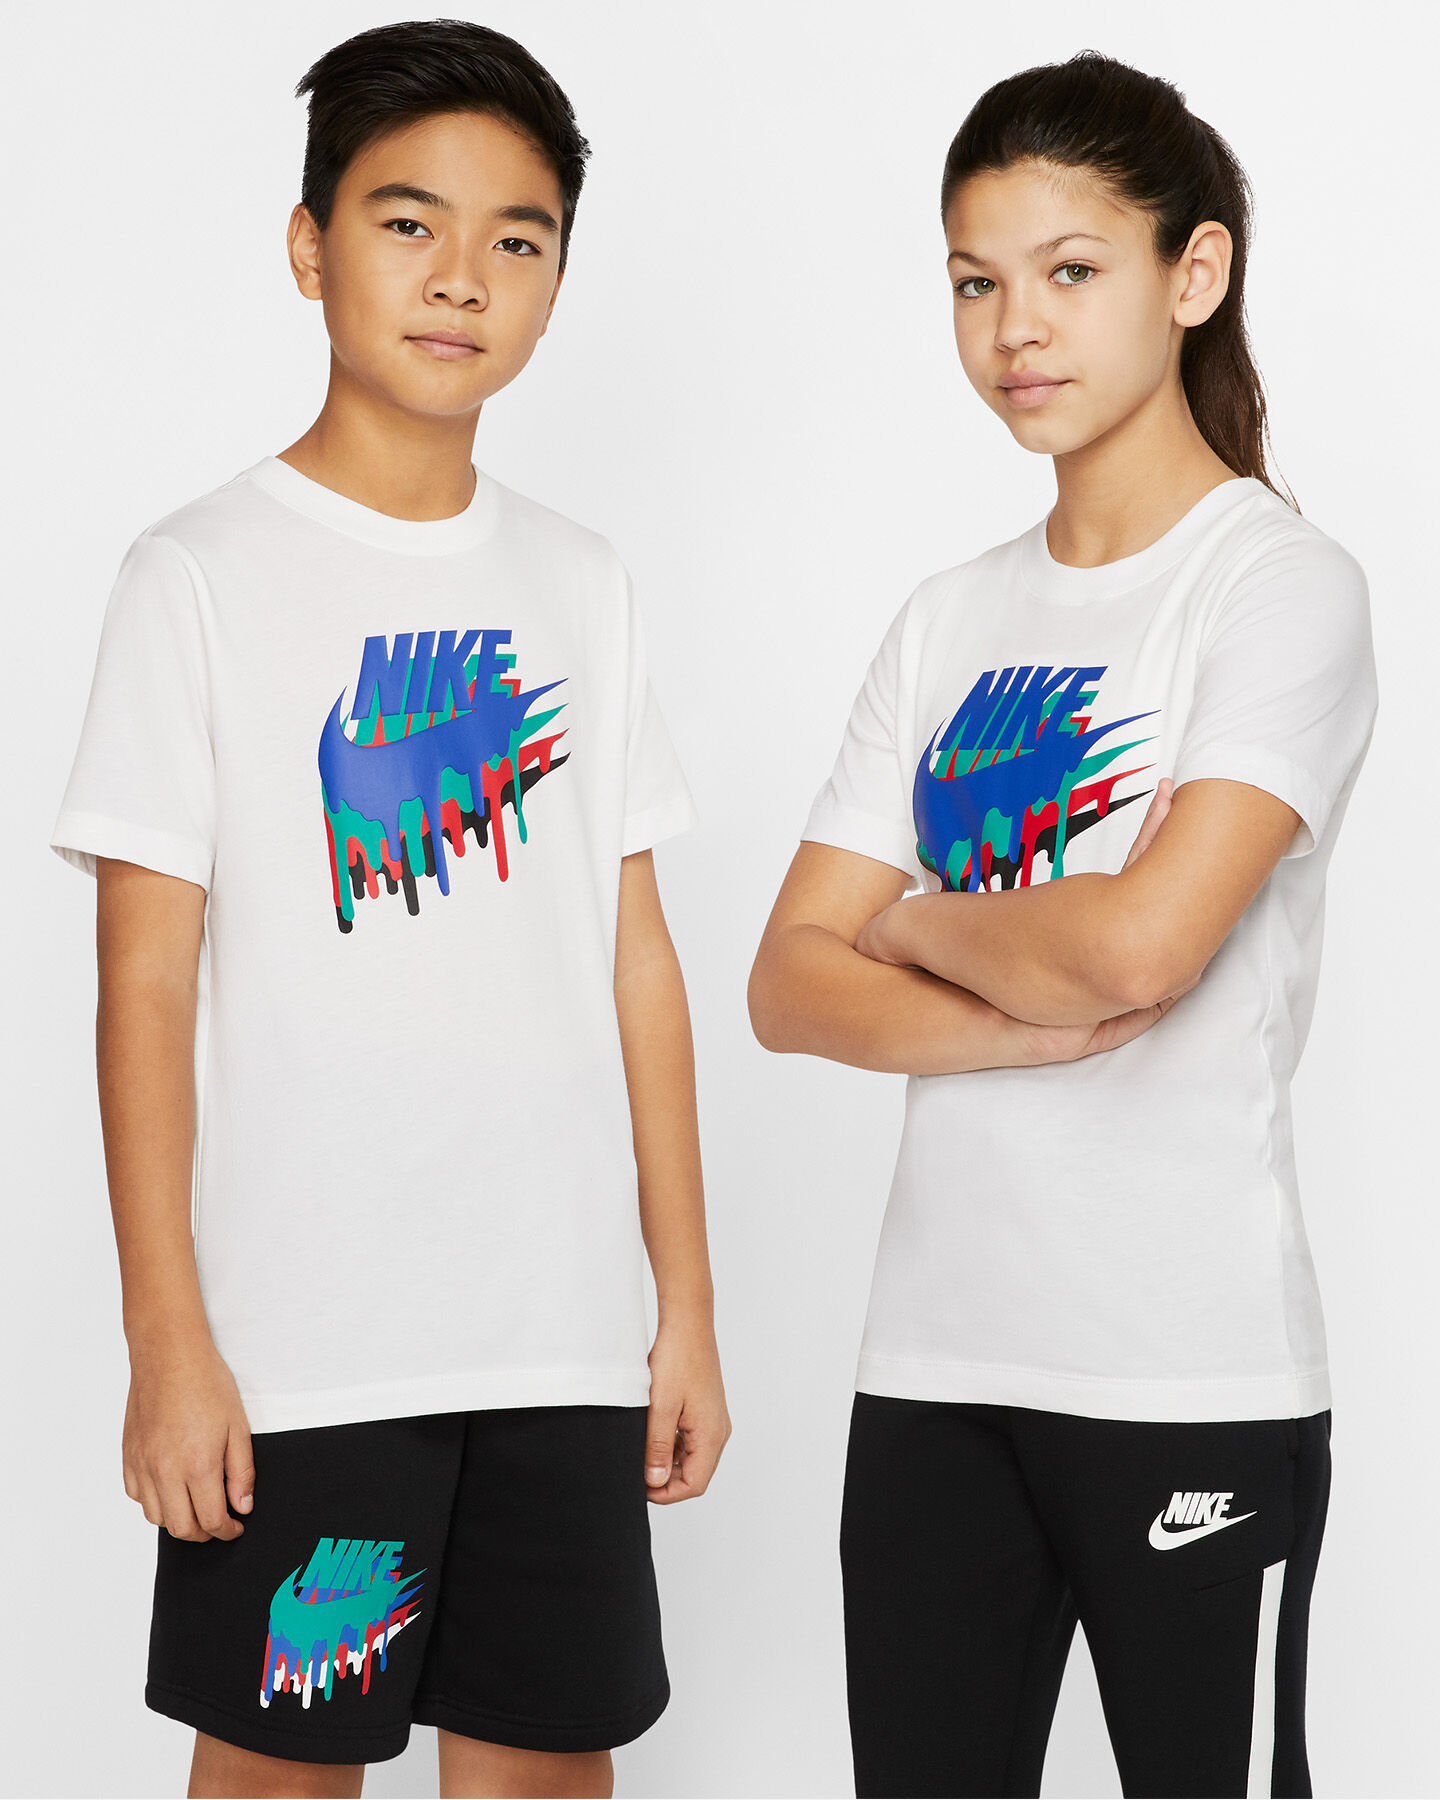  T-Shirt NIKE CRAYON JR S5165057|100|S scatto 3